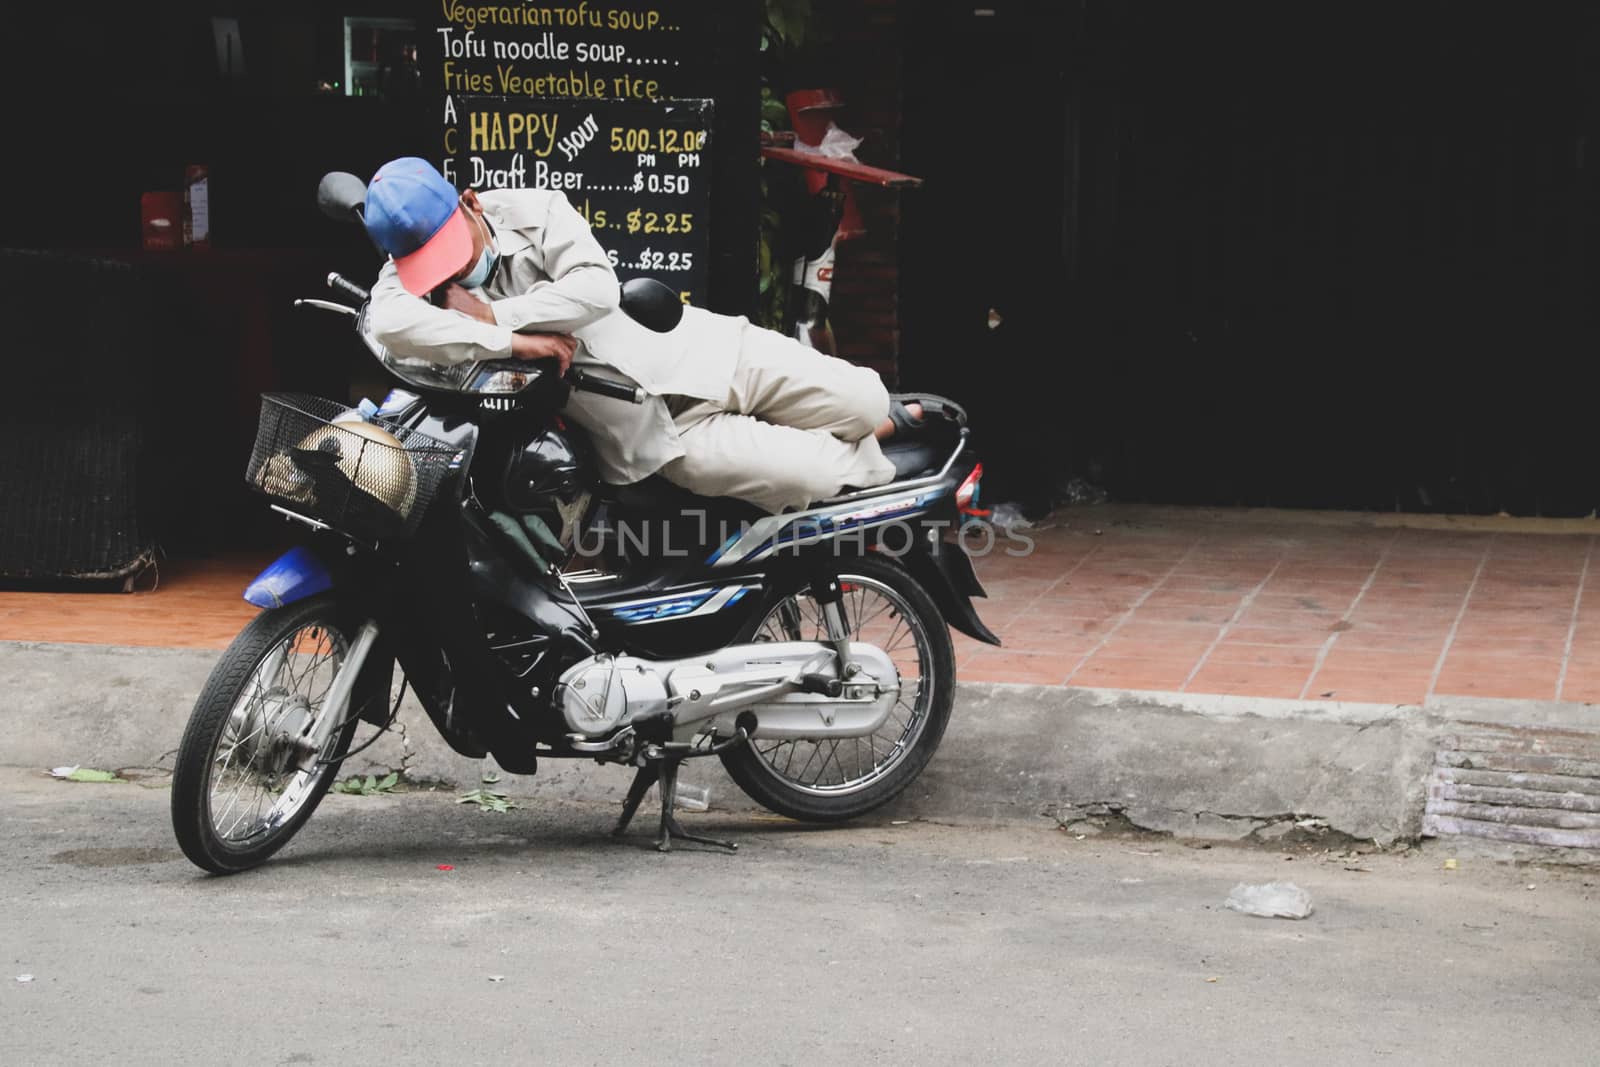 Cambodian Driver Sleeps on Motorbike by Sonnet15